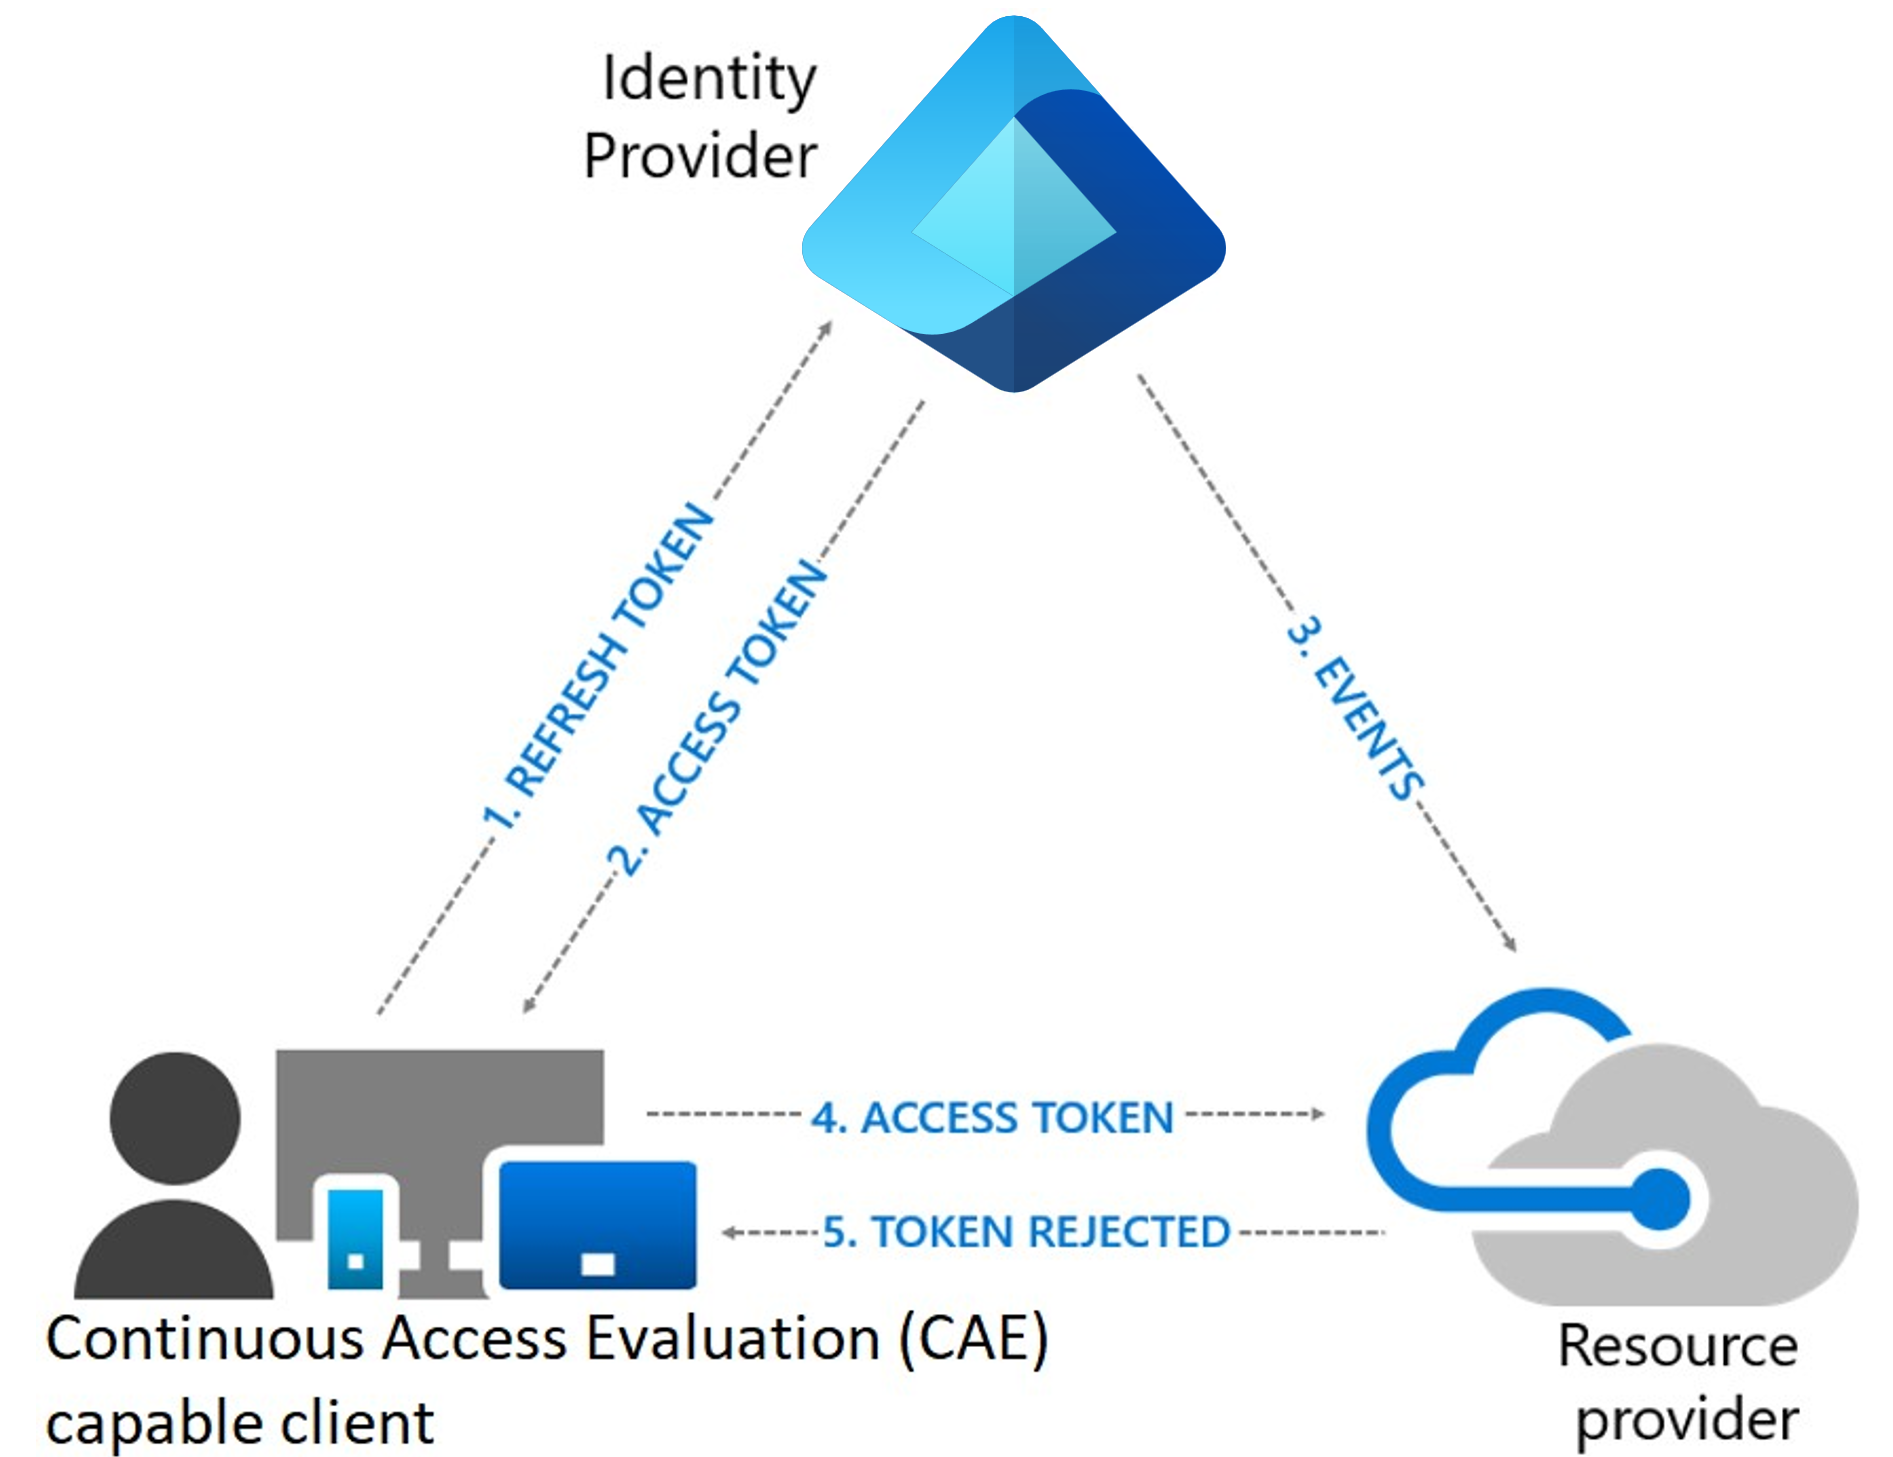 Diagram of the process flow when an access token is revoked and a client has to reverify access.